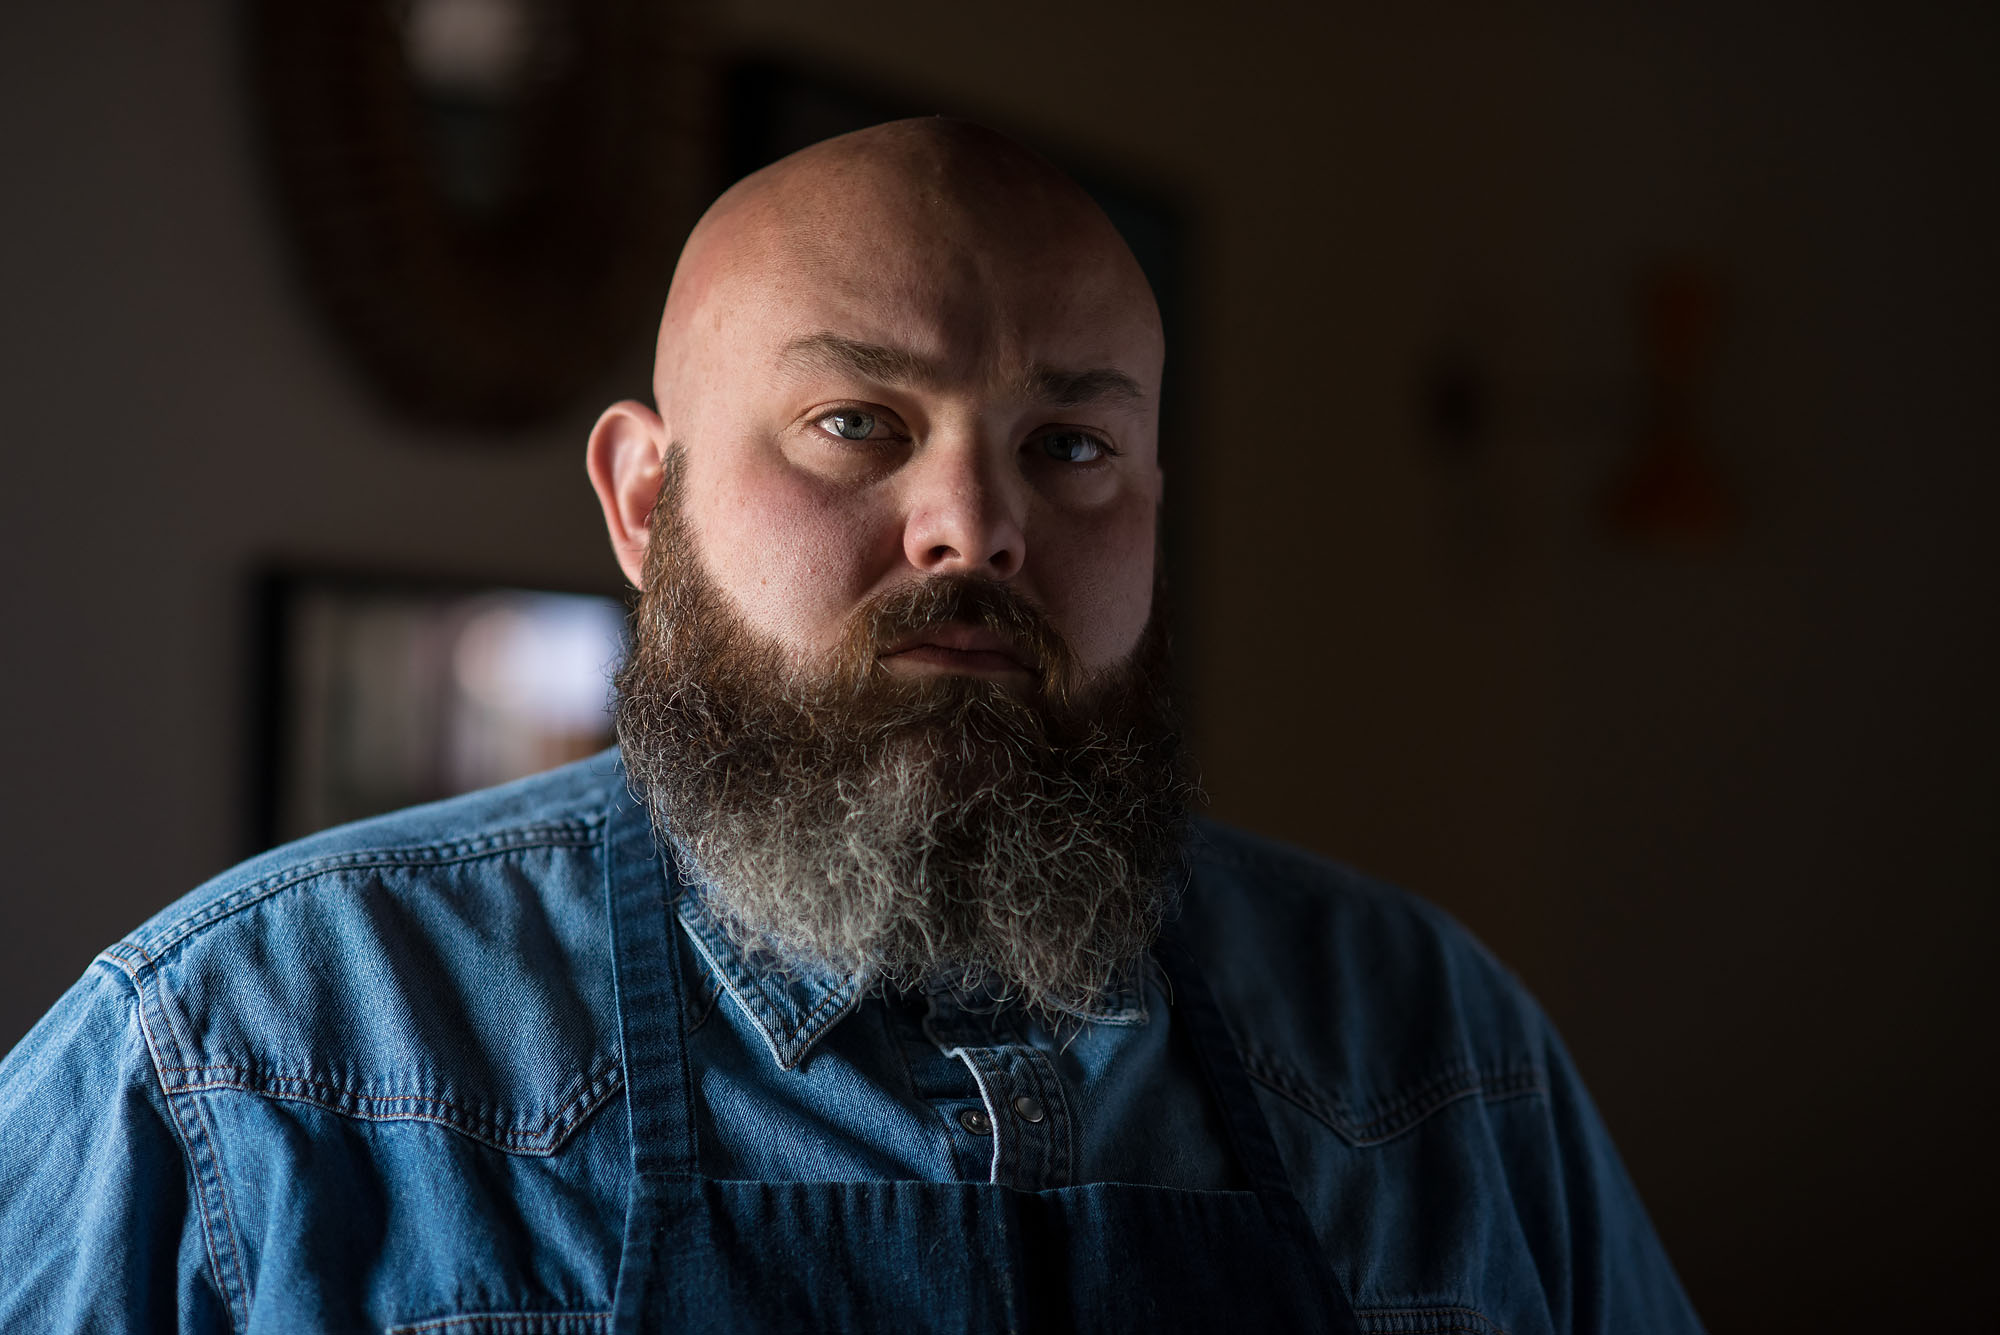 Chef Evan Funke stands looking at the camera with a large beard and stern eyes.